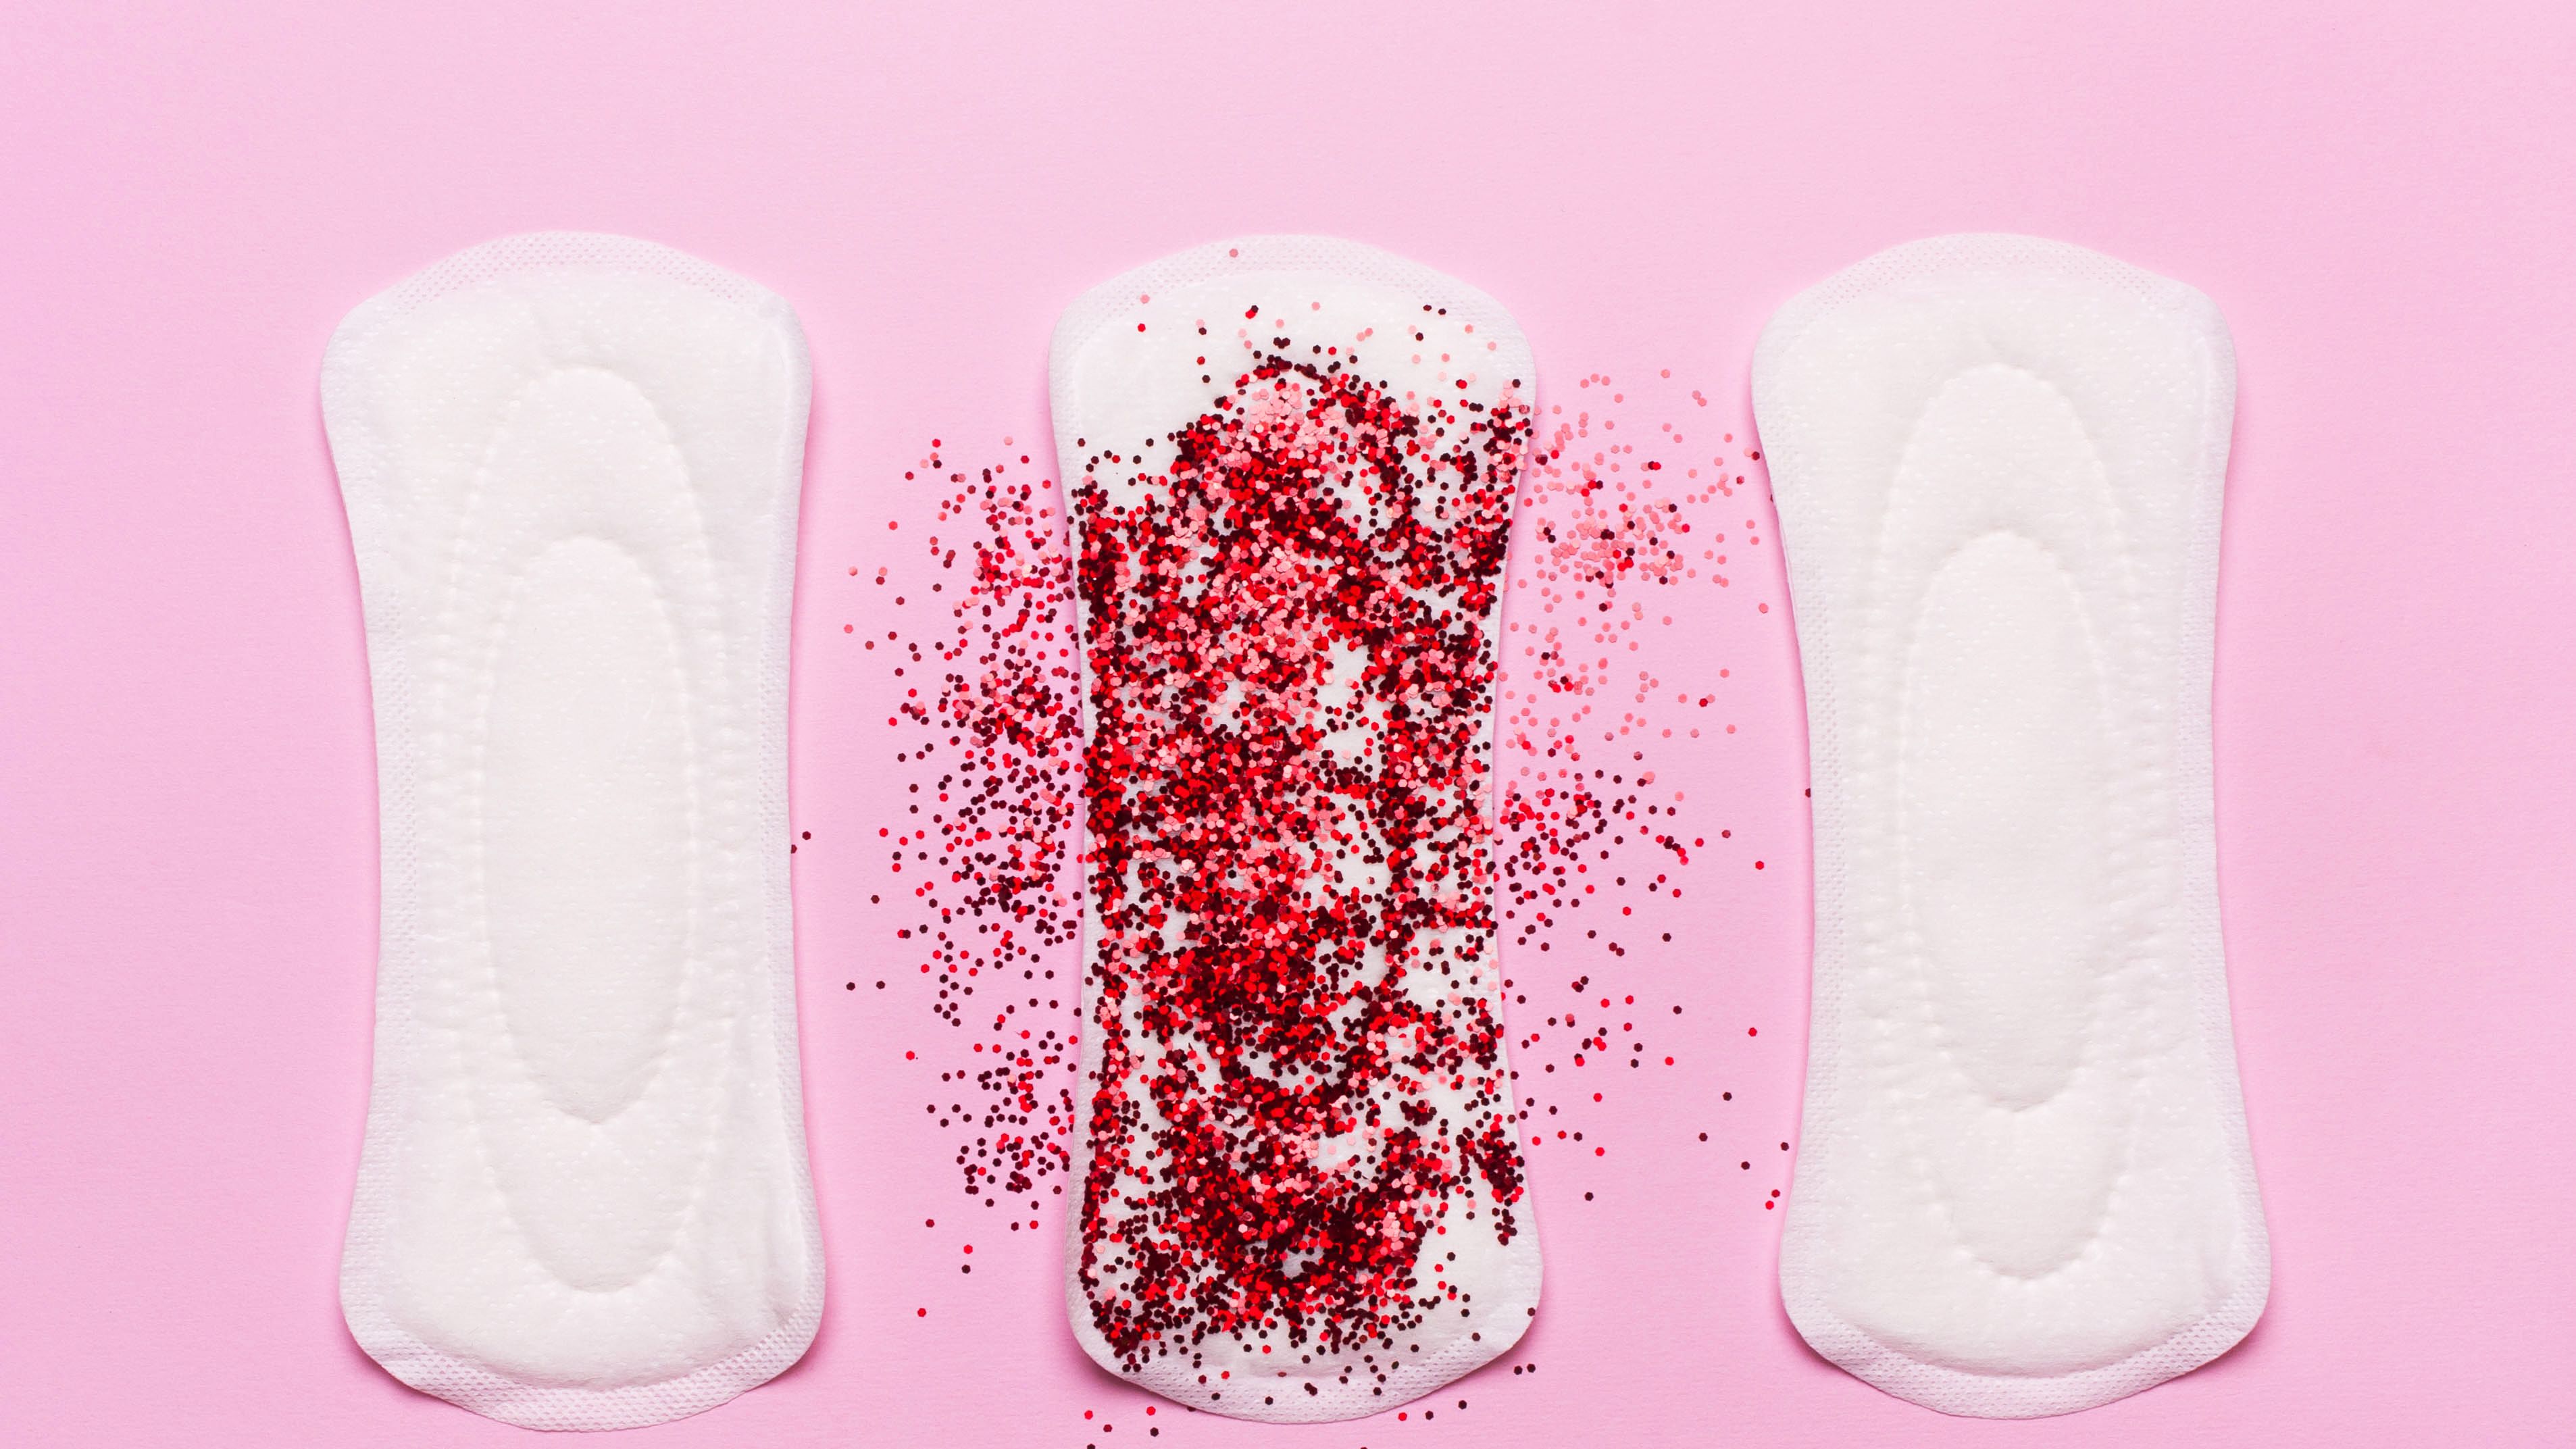 Nua, Worried about thick menstrual blood? Our period, just like us, comes  in all different shapes and sizes. Swipe on to know all about it in